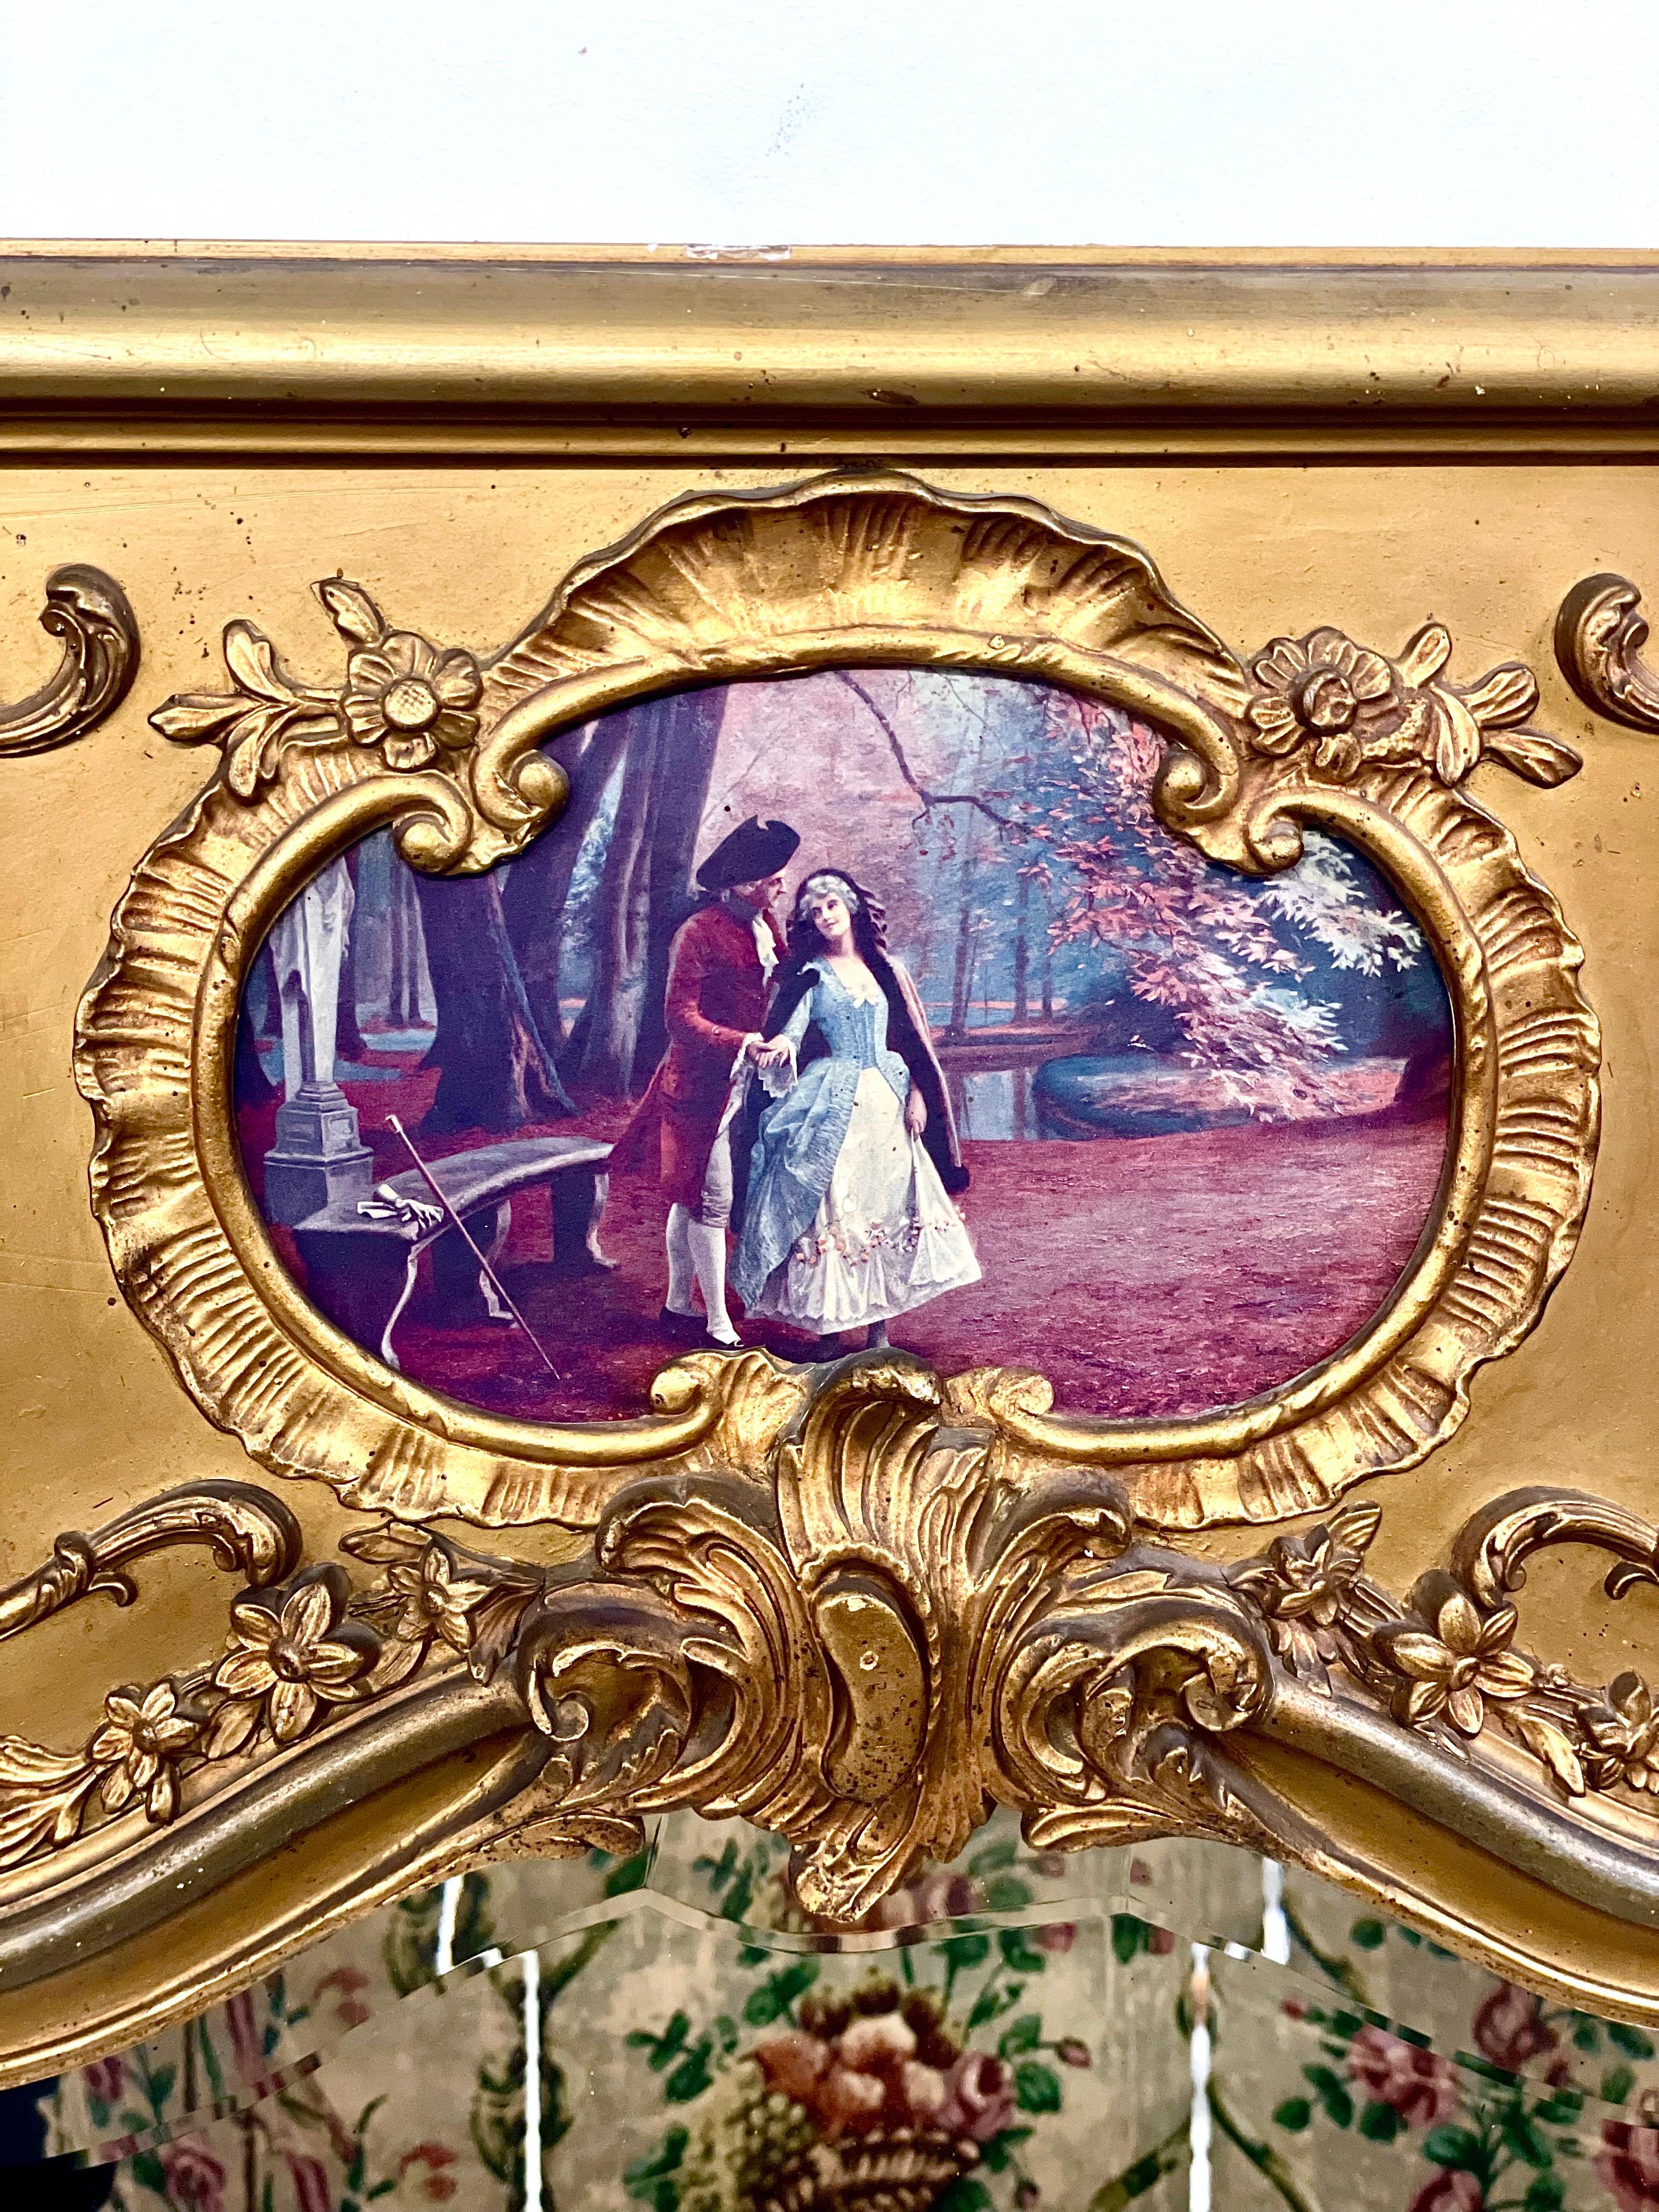 An impressive and very pretty Louis XV-style trumeau mirror crafted from gilded wood and stucco in the Rococo style, and featuring in its upper section a reproduction painting of a romantic scene with two lovers in a stylised woodland setting. The